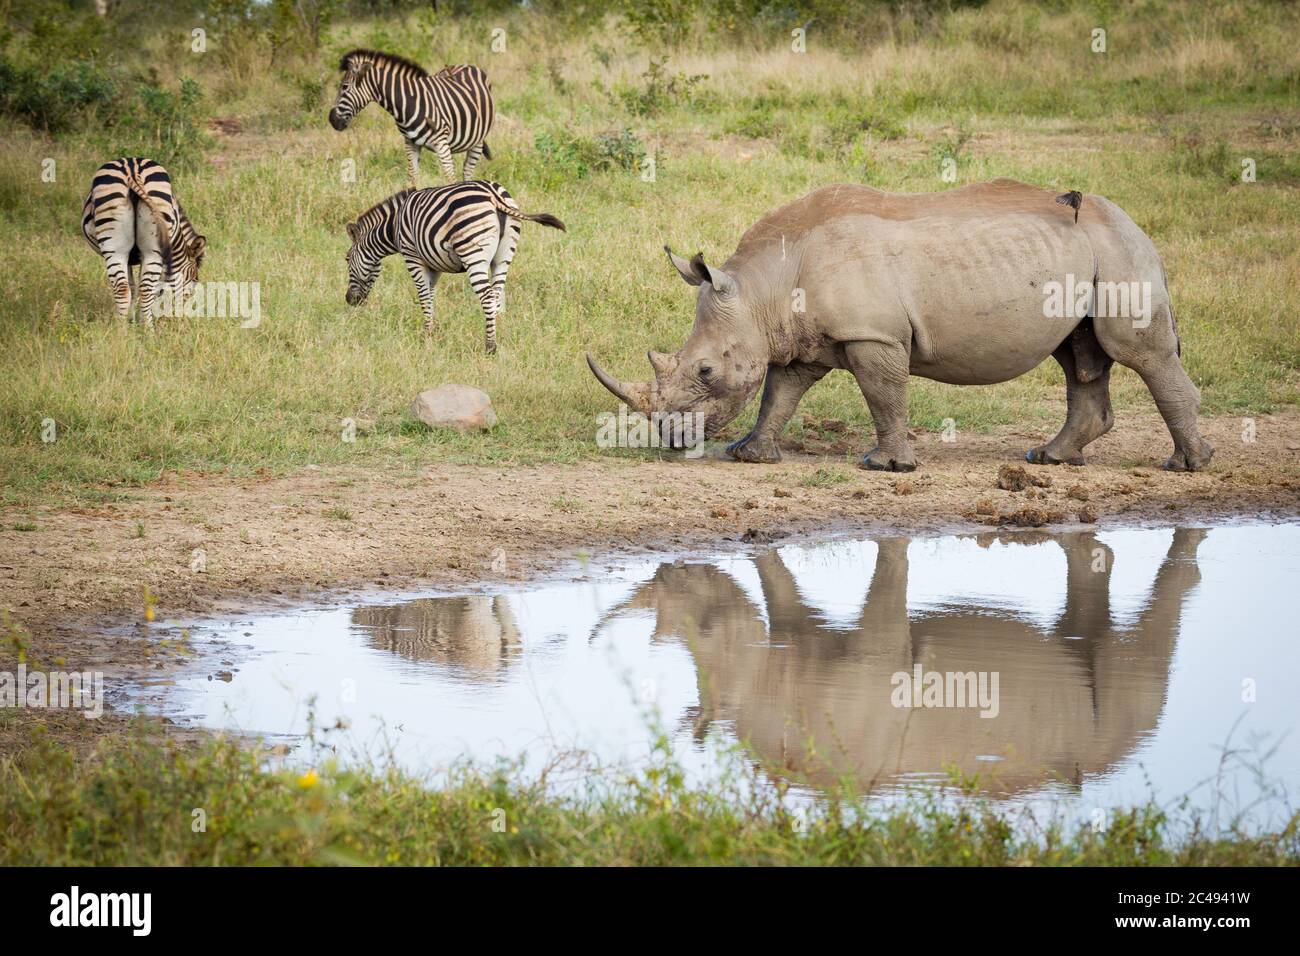 One adult rhino walking near the water with three zebra grazing nearby in Kruger Park South Africa Stock Photo